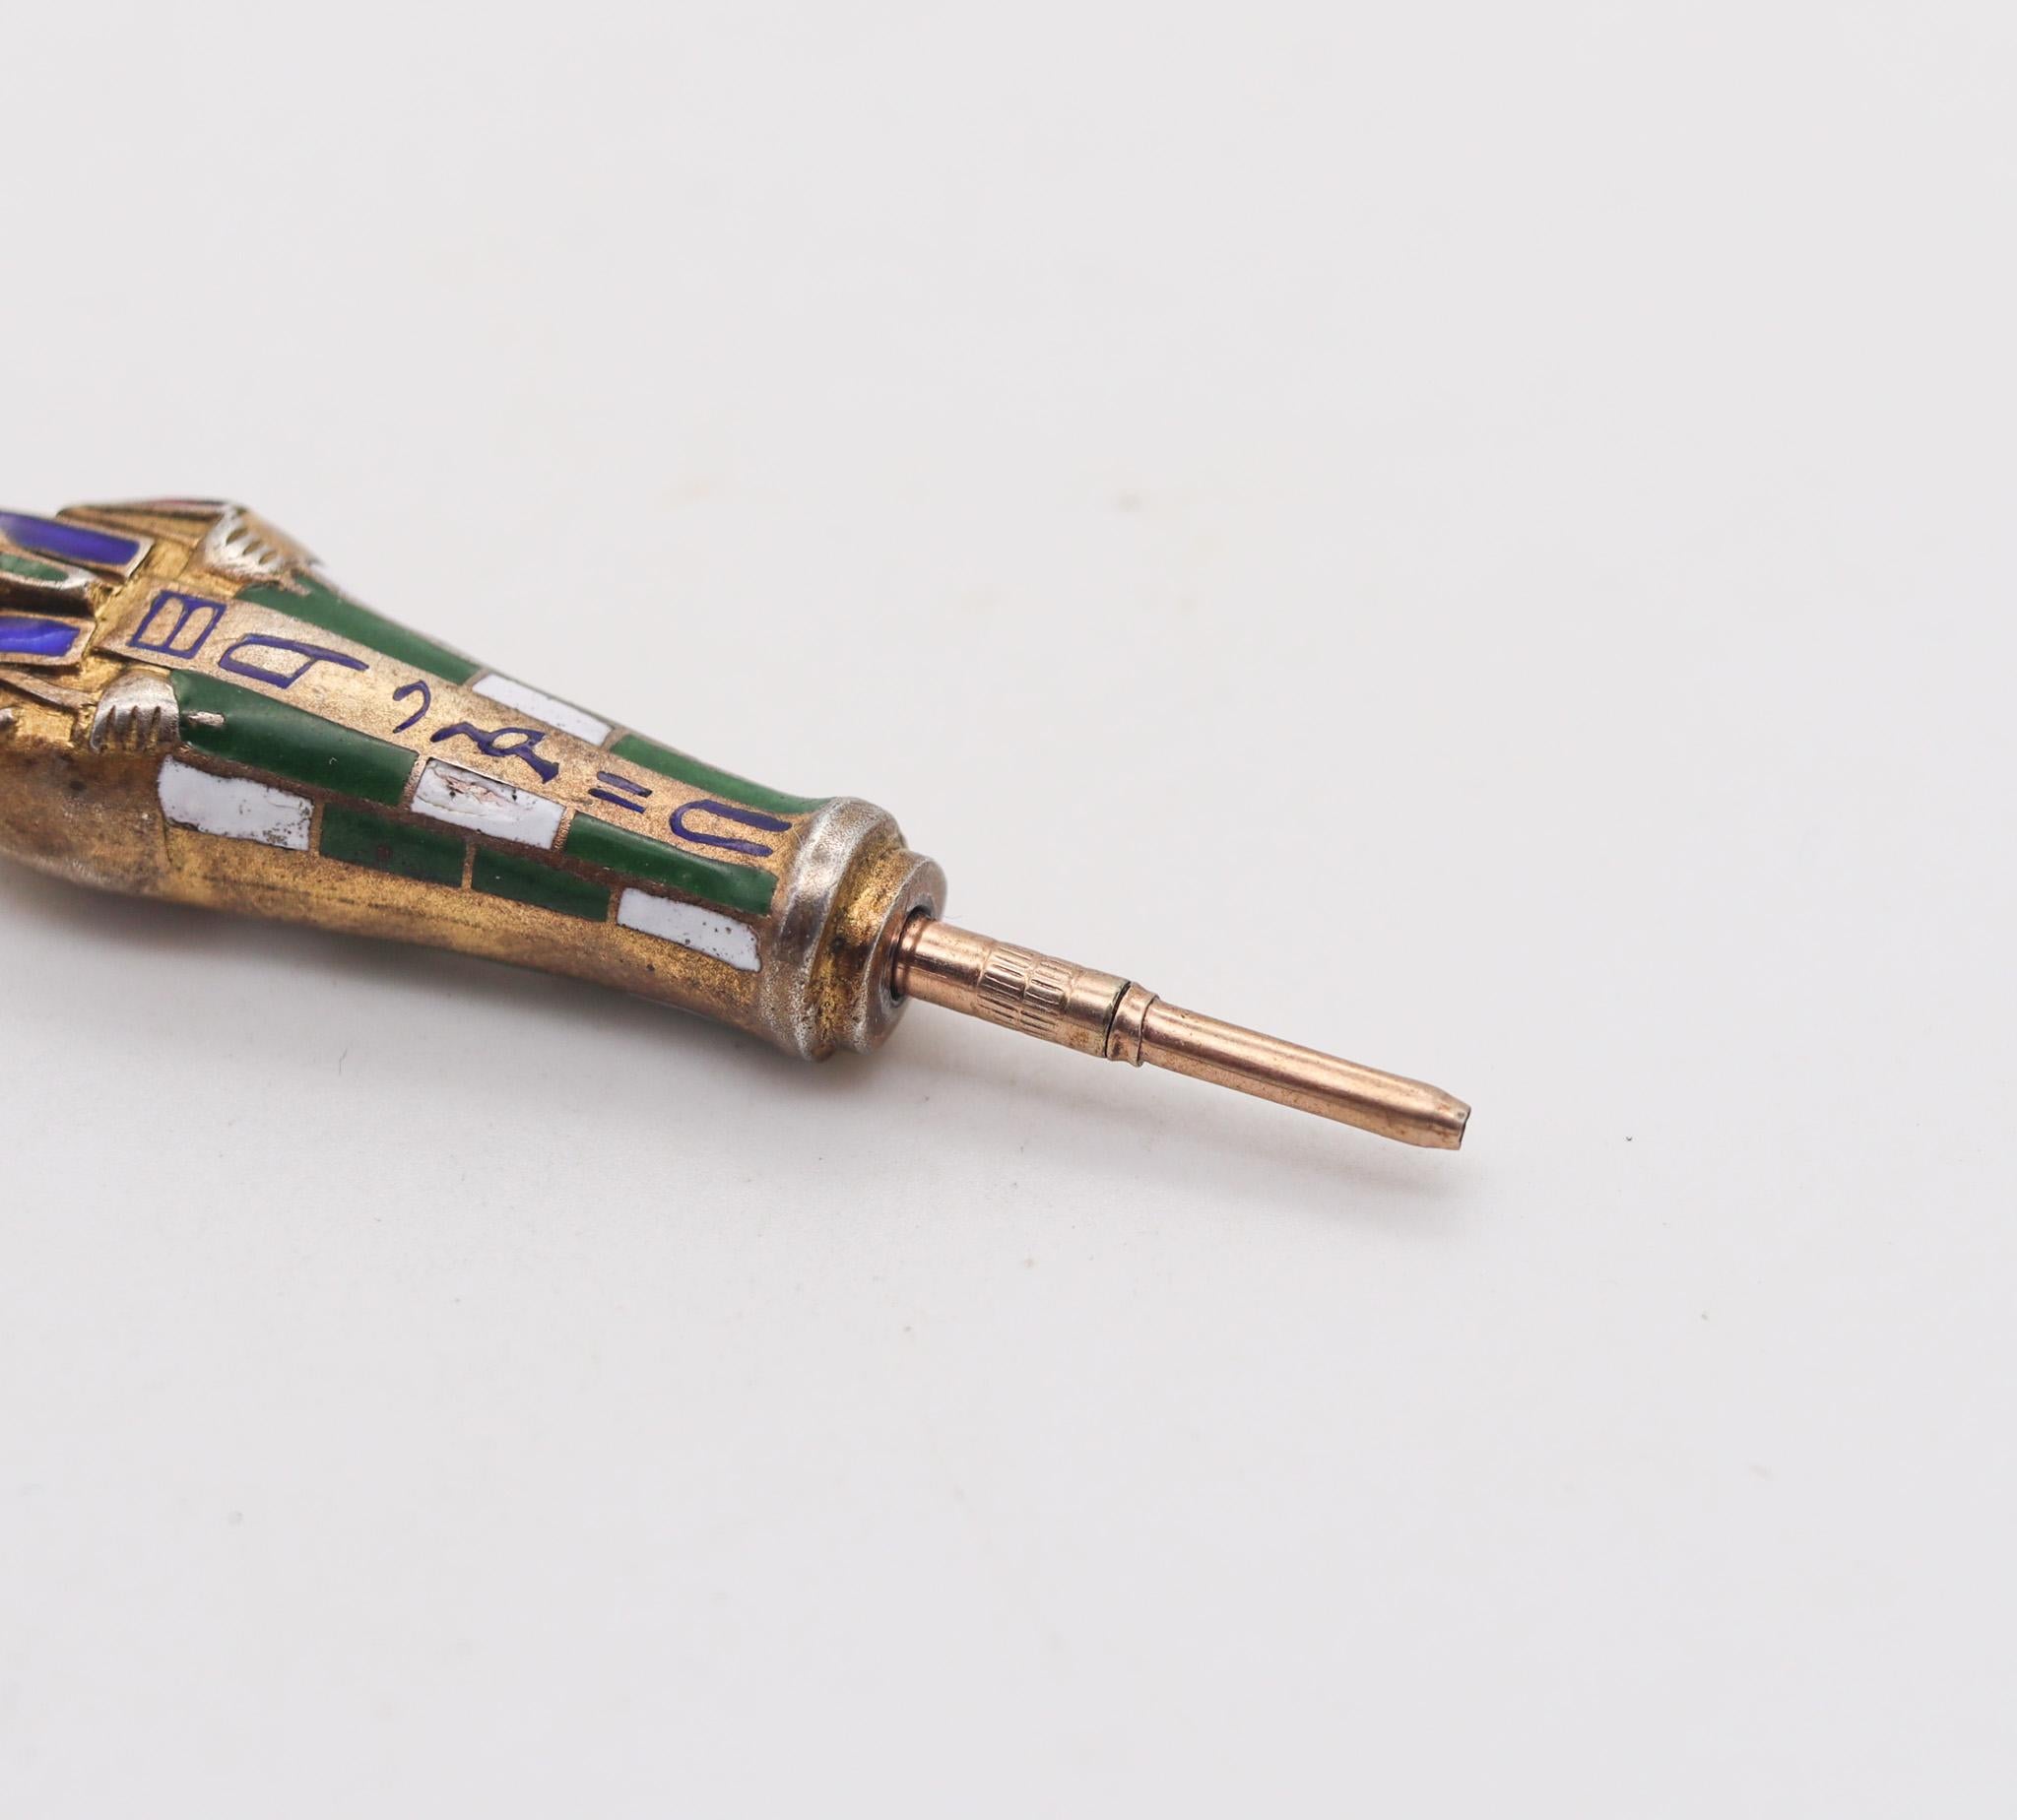 Art Deco 1913 Egyptian Revival Pharaoh Retractable Pencil .800 Silver And Enamel In Excellent Condition For Sale In Miami, FL